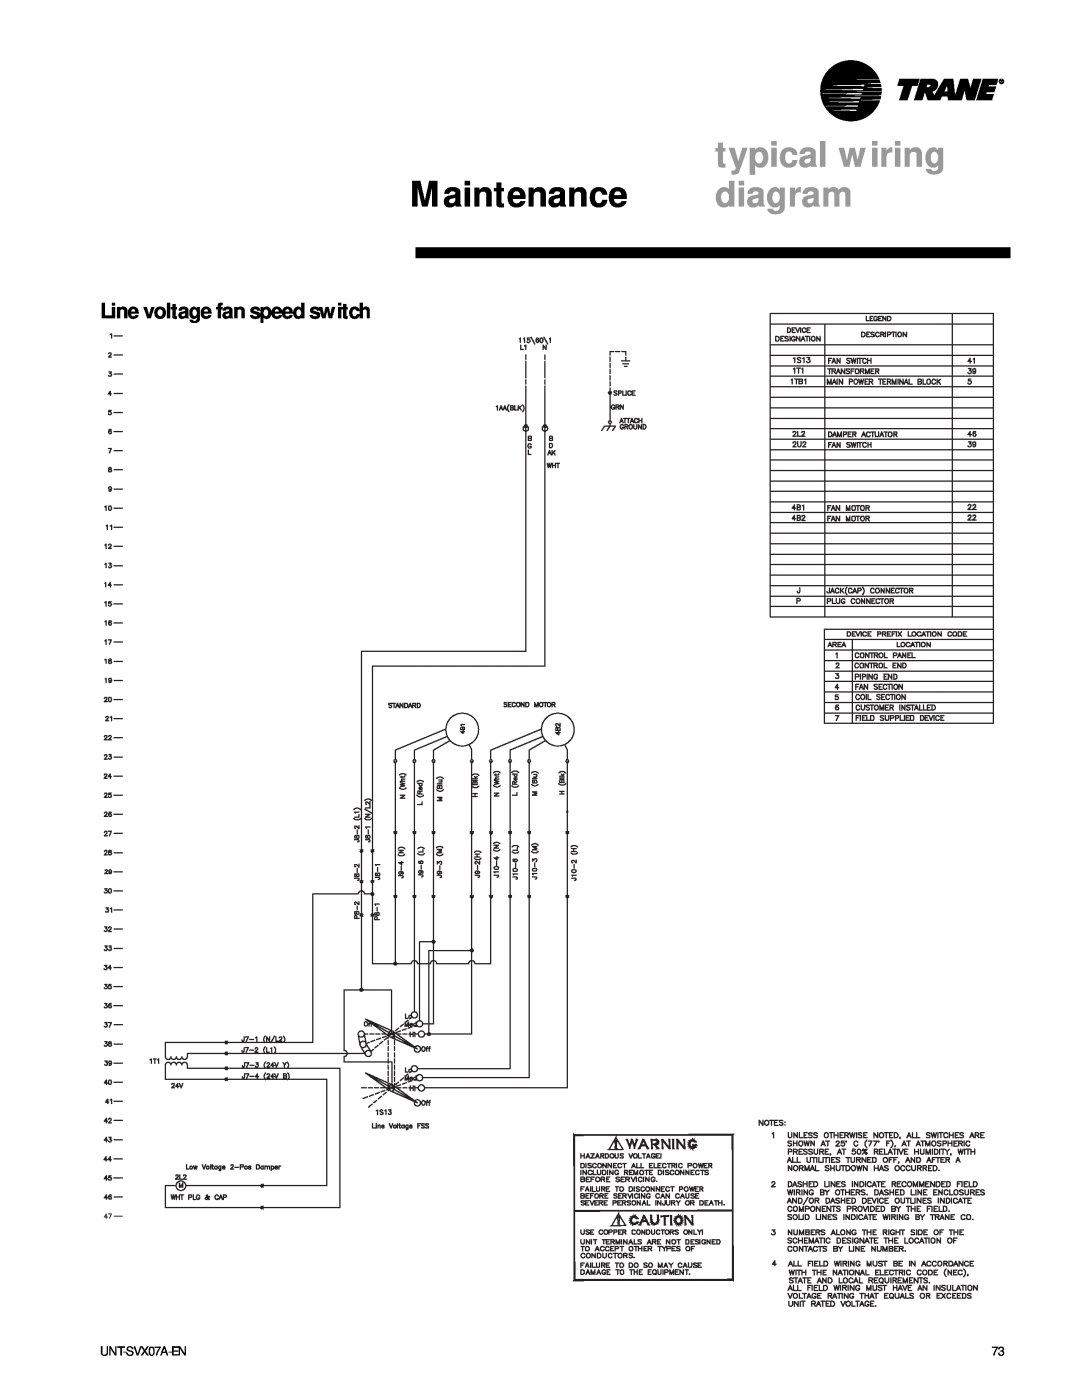 Trane UniTrane Fan-Coil & Force Flo Air Conditioners Line voltage fan speed switch, typical wiring, Maintenance diagram 